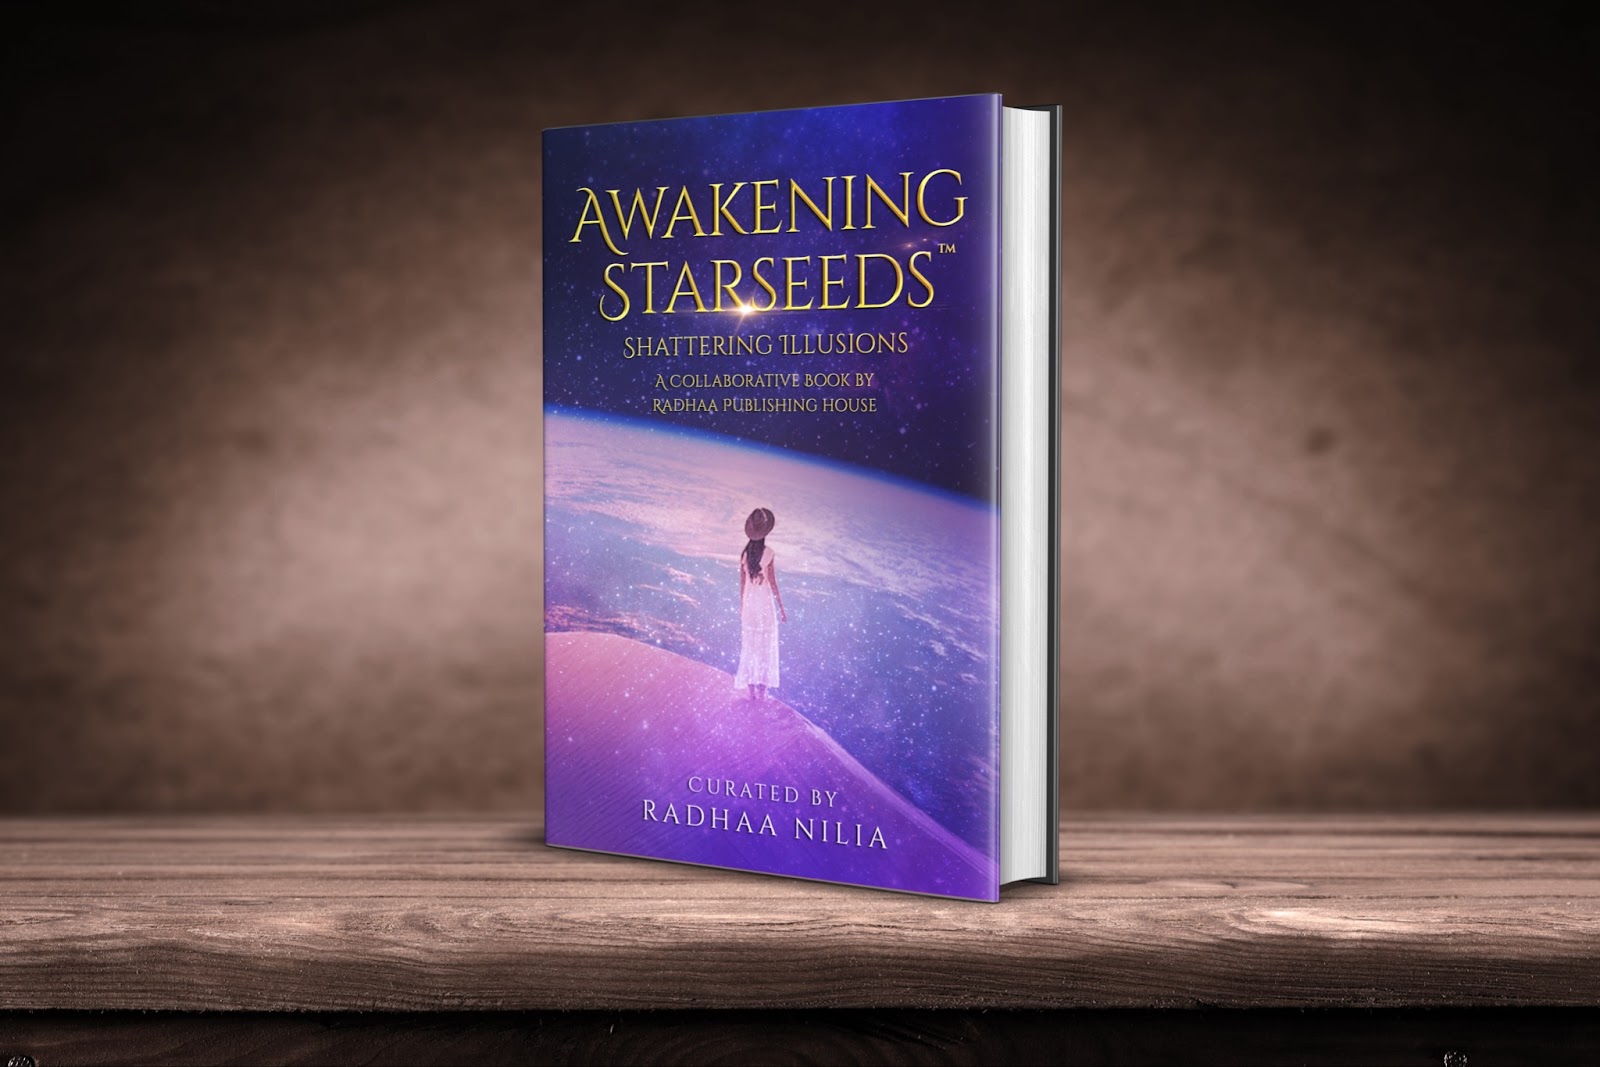 Welcome to the first and original Awakening Starseed book series ever put out in the world. We realized that it’s time to come together with other Starseeds to journey into this historical time we are living in. From this age of darkness, Kali Yuga, we are entering the age of truth and light, Satya Yuga. As we watch the crumbling of the old paradigm, we can choose to be fearful, or we can decide to step into our divine power, purpose, and truth. This book series is a bridge to other Starseeds who are looking for inspiration and guidance. Like precious gems, unearthed from deep within, each story contains Starseed messages, Transmissions and Activations to inspire you. Starseeds are volunteers on Earth to contribute to the current ascension shift taking place on the planet right now. Published by Radhaa Publishing House. www.RadhaaPublishingHouse.com. 